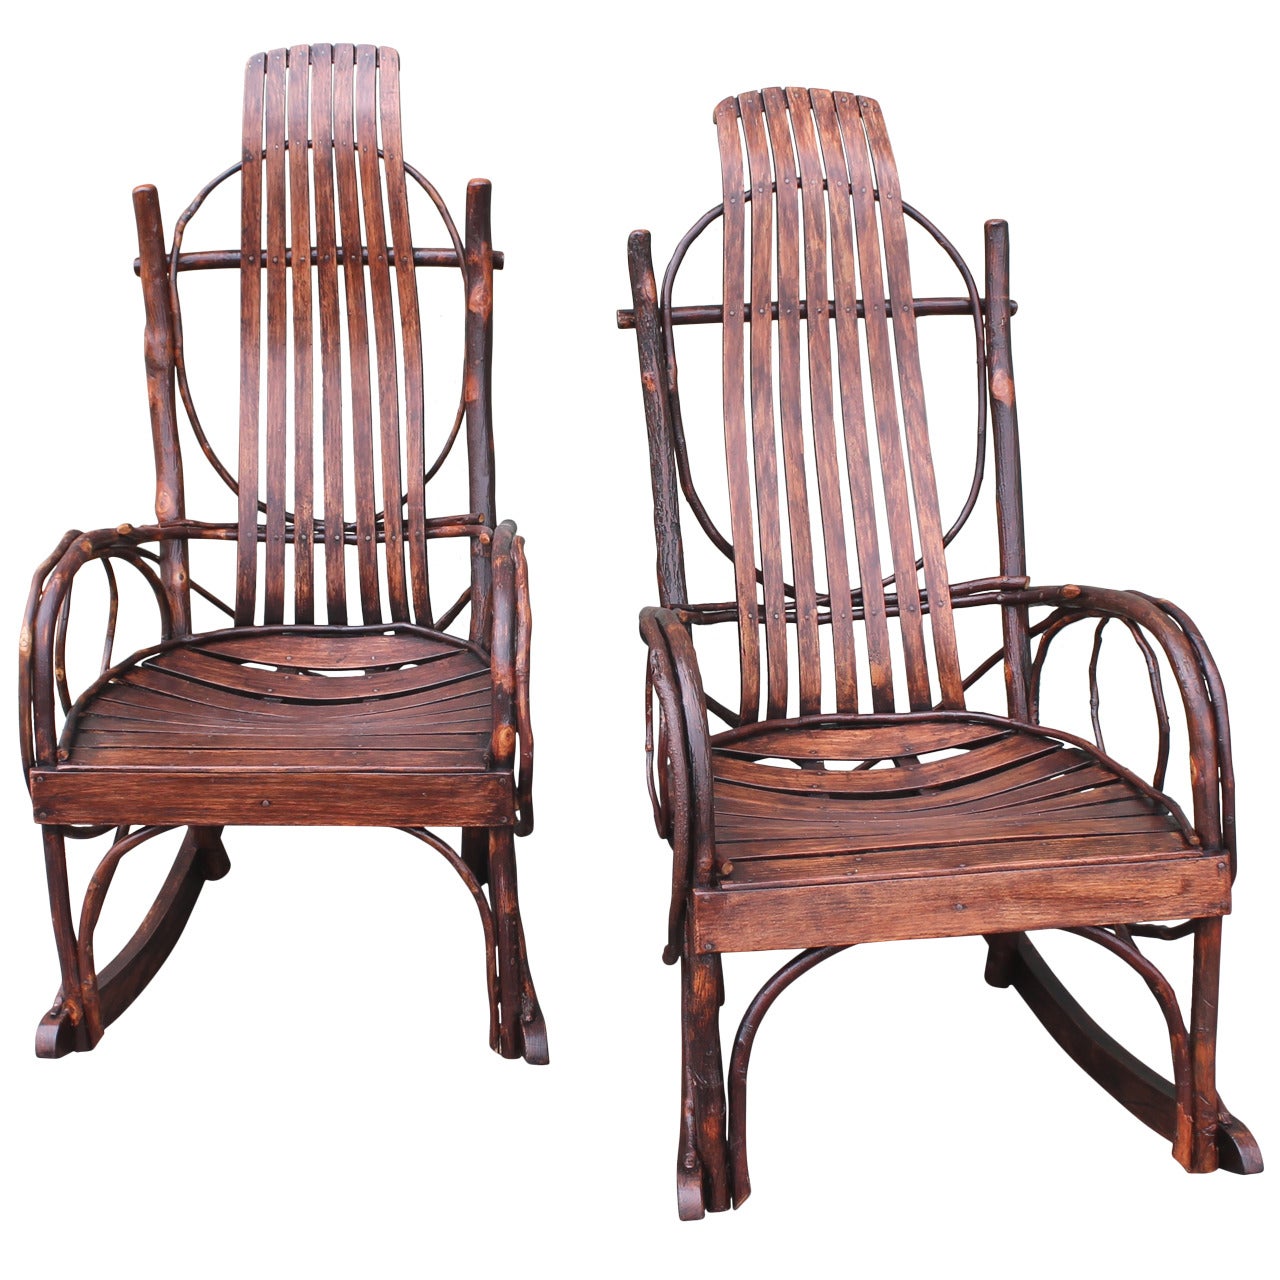 Pair of Matching Amish Bentwood Rocking Chairs